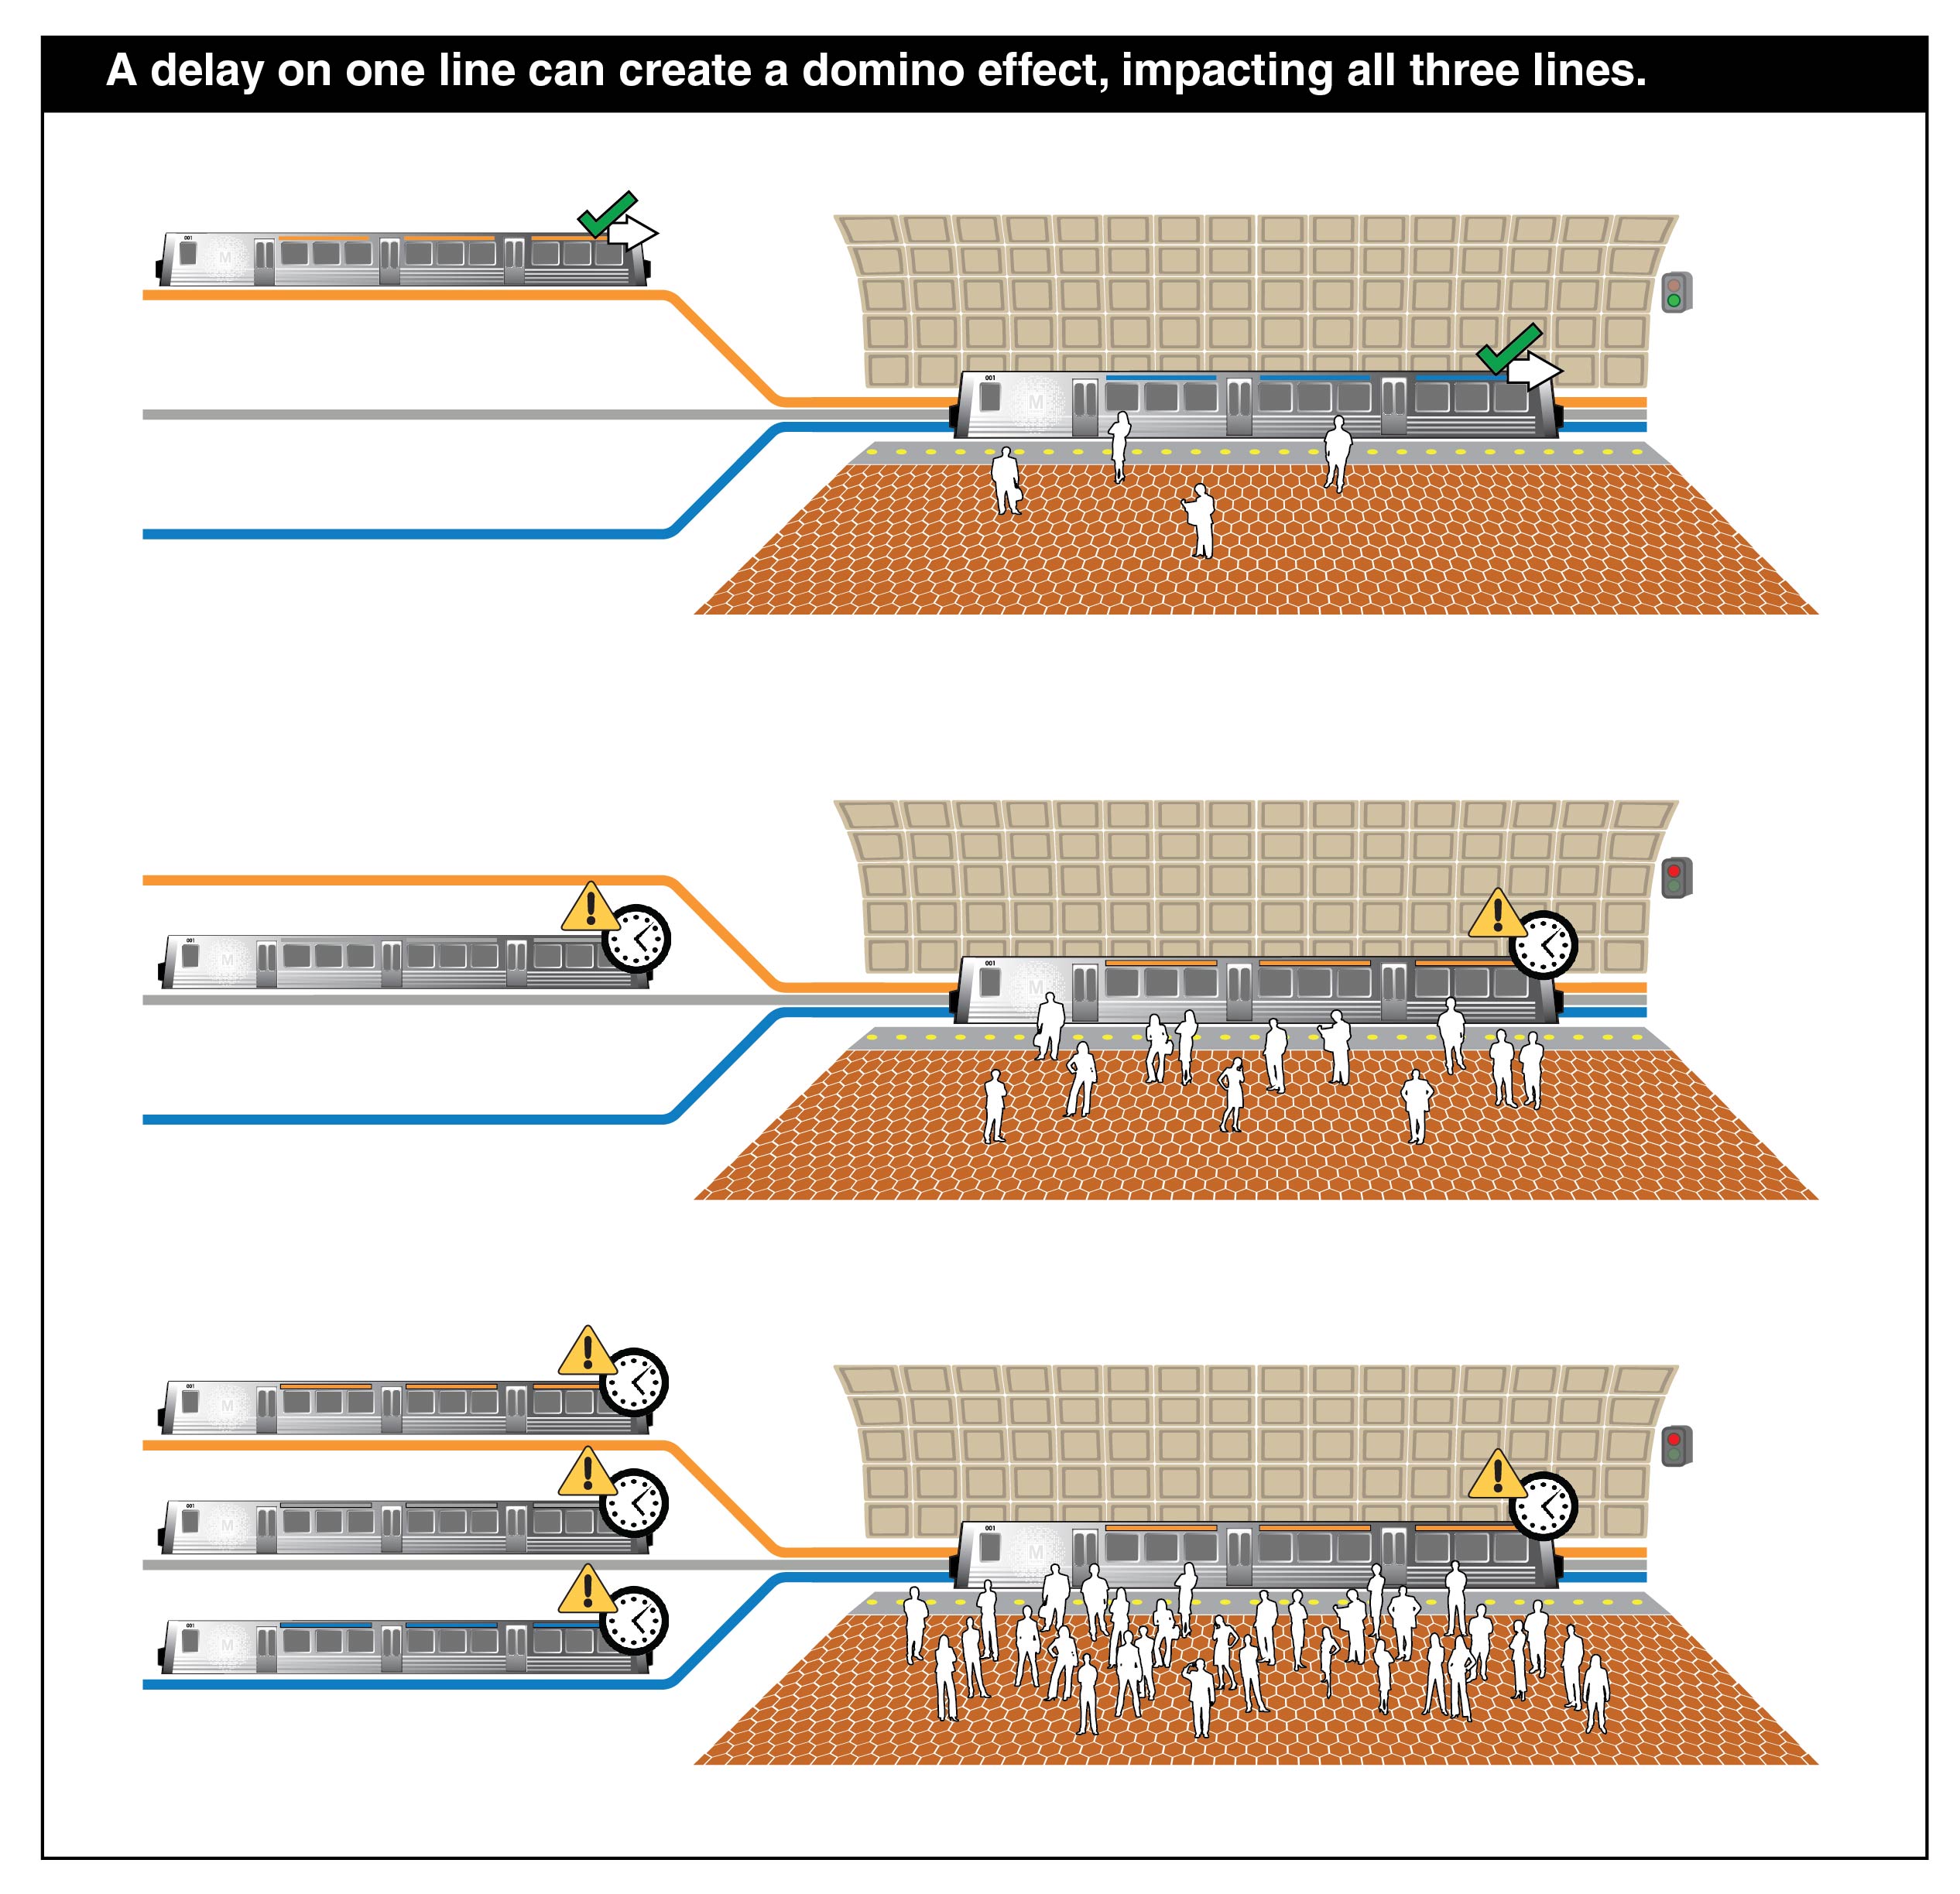 Illustration showing how delays on one line impact service on all three lines.